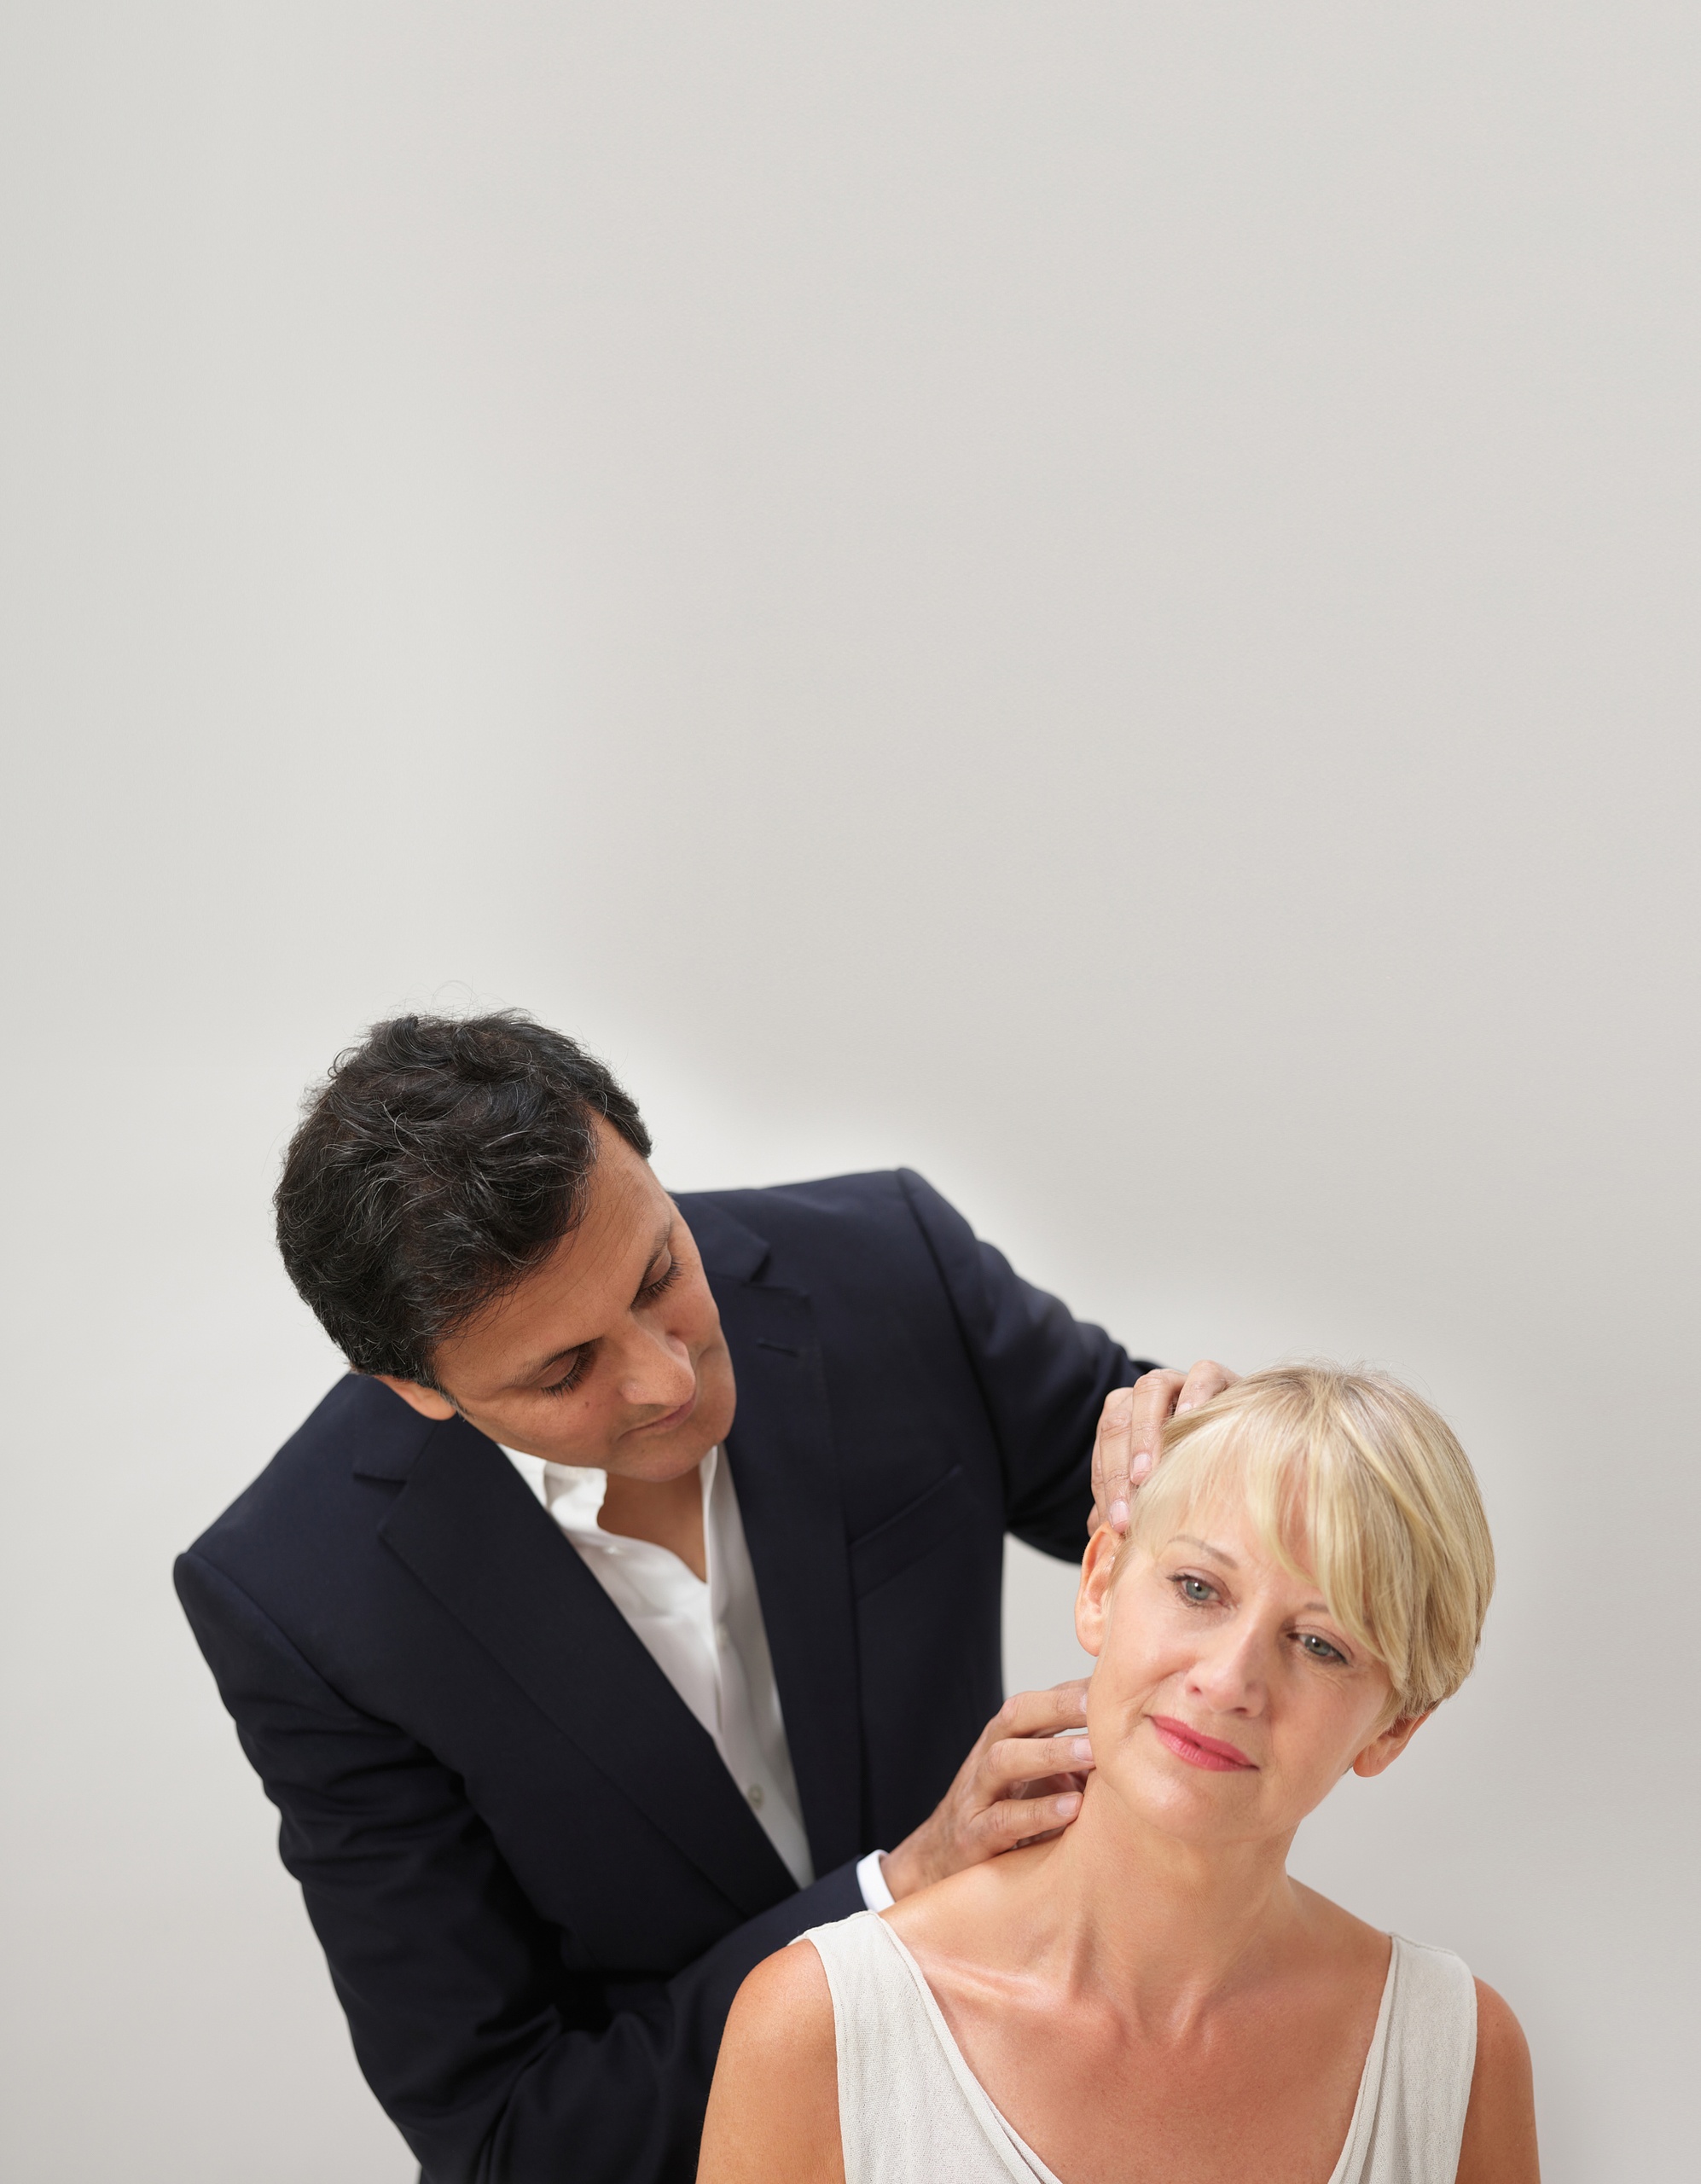 The uk's best facelift surgeon Rajiv Grover examining a facelift patient